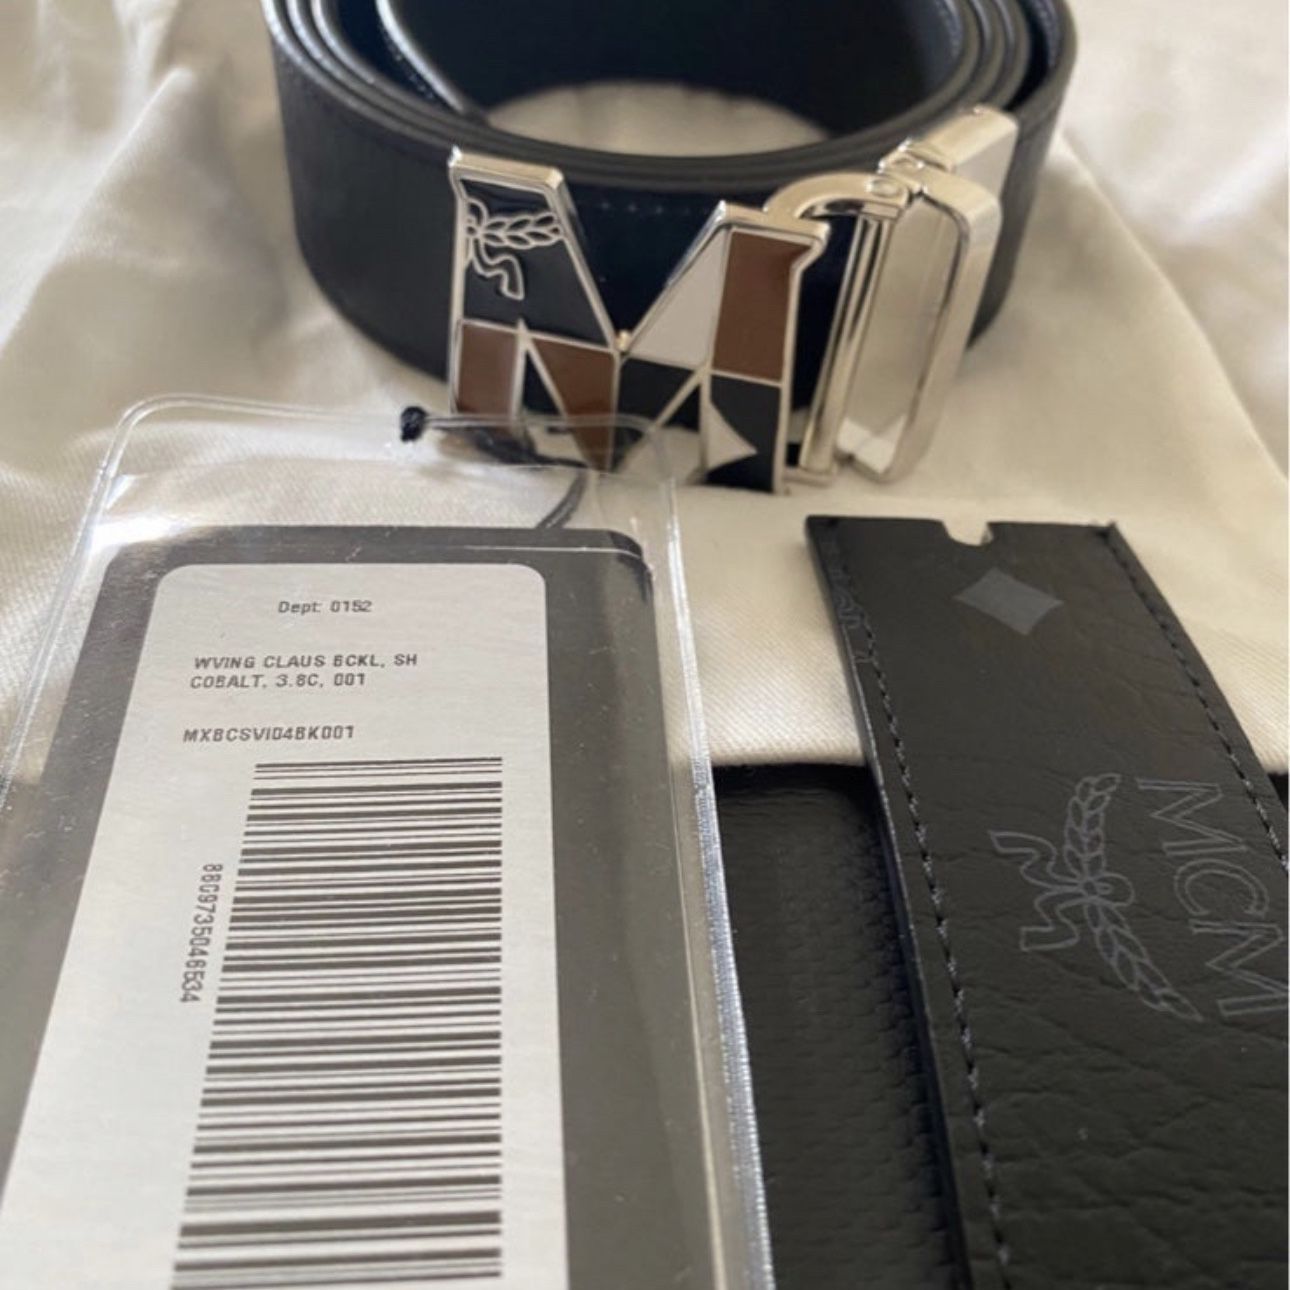 Authentic MCM Claus Blue/Black Reversible Belt for Sale in Queens, NY -  OfferUp